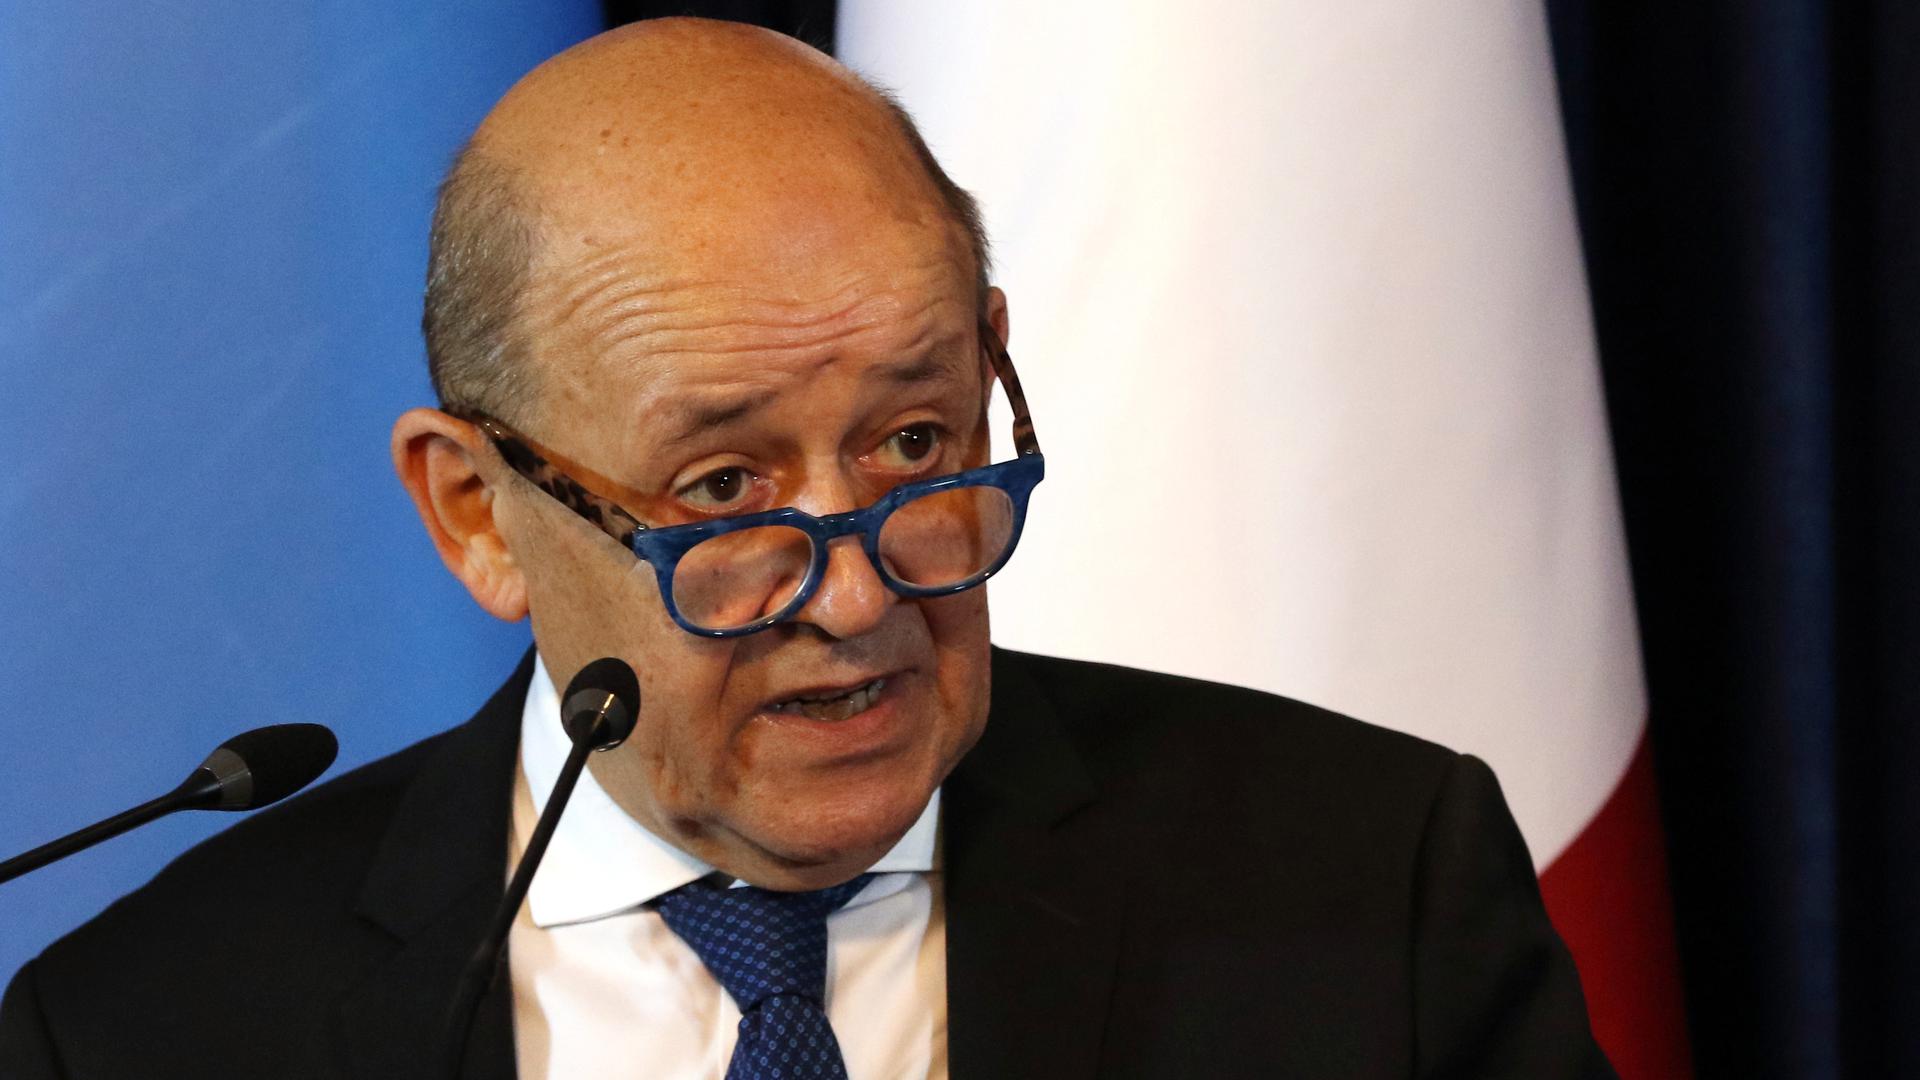 French Foreign Minister Jean-Yves Le Drian